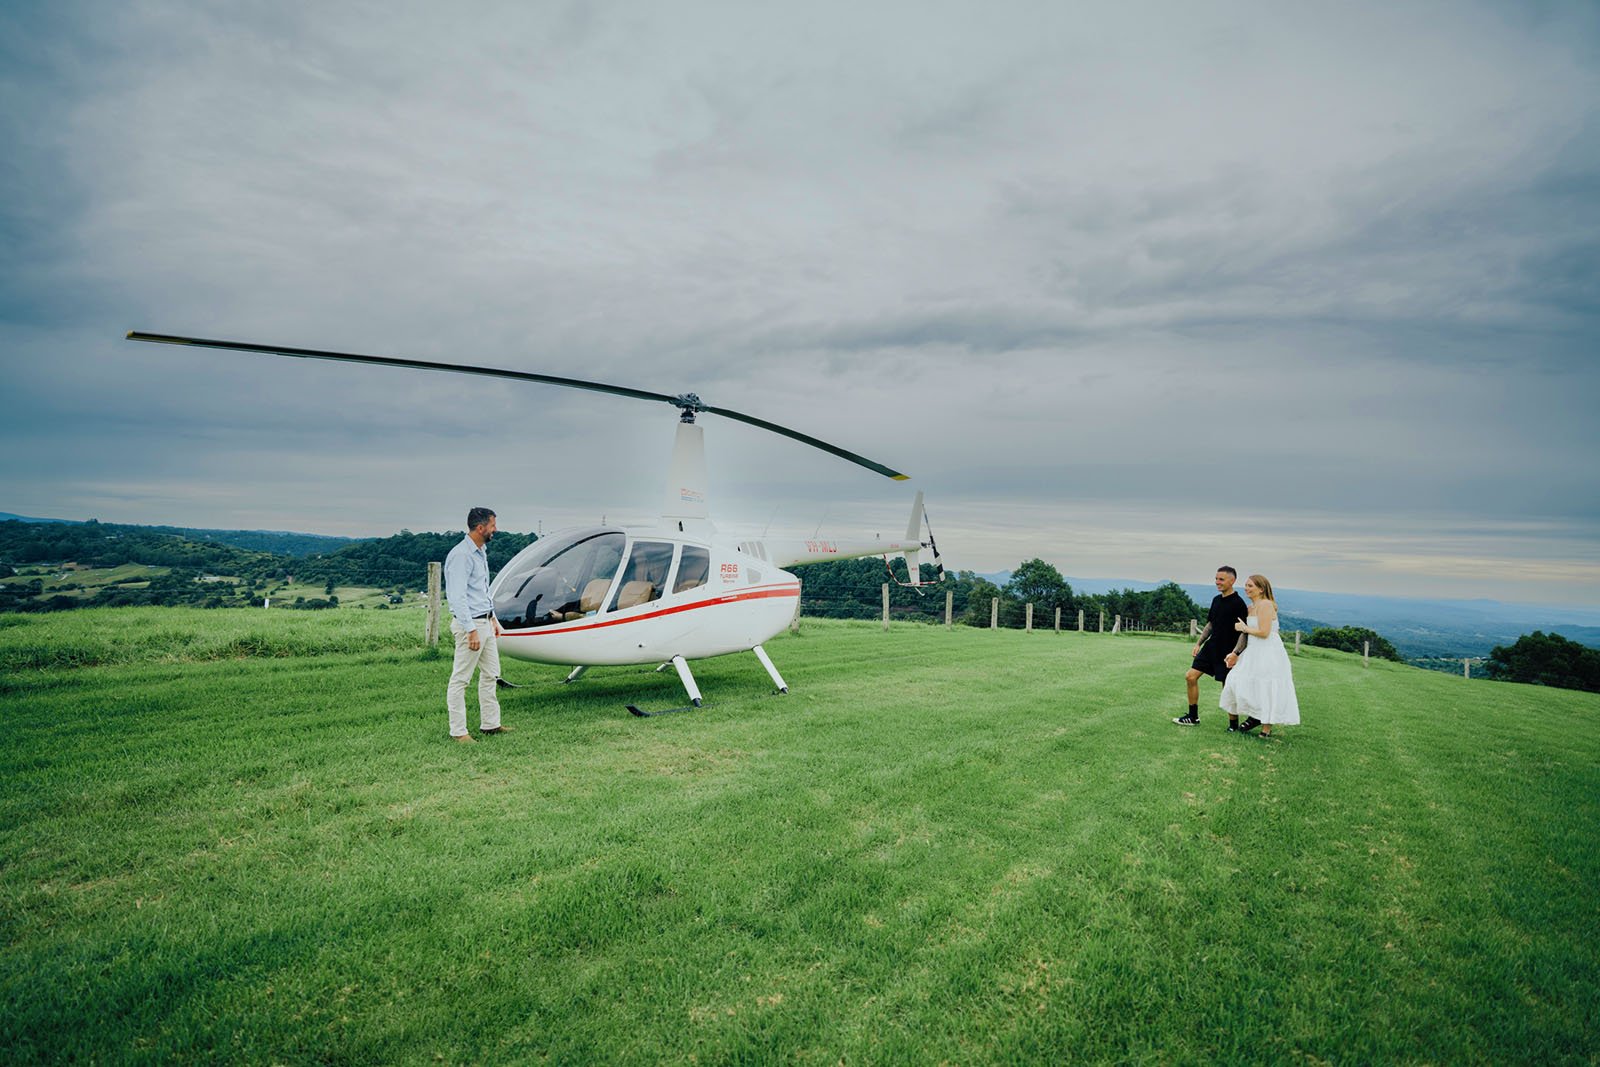 At Petrichor Estate, you can enjoy scenic helicopter tours, guided by an expert, through the hills and cloudy skies.